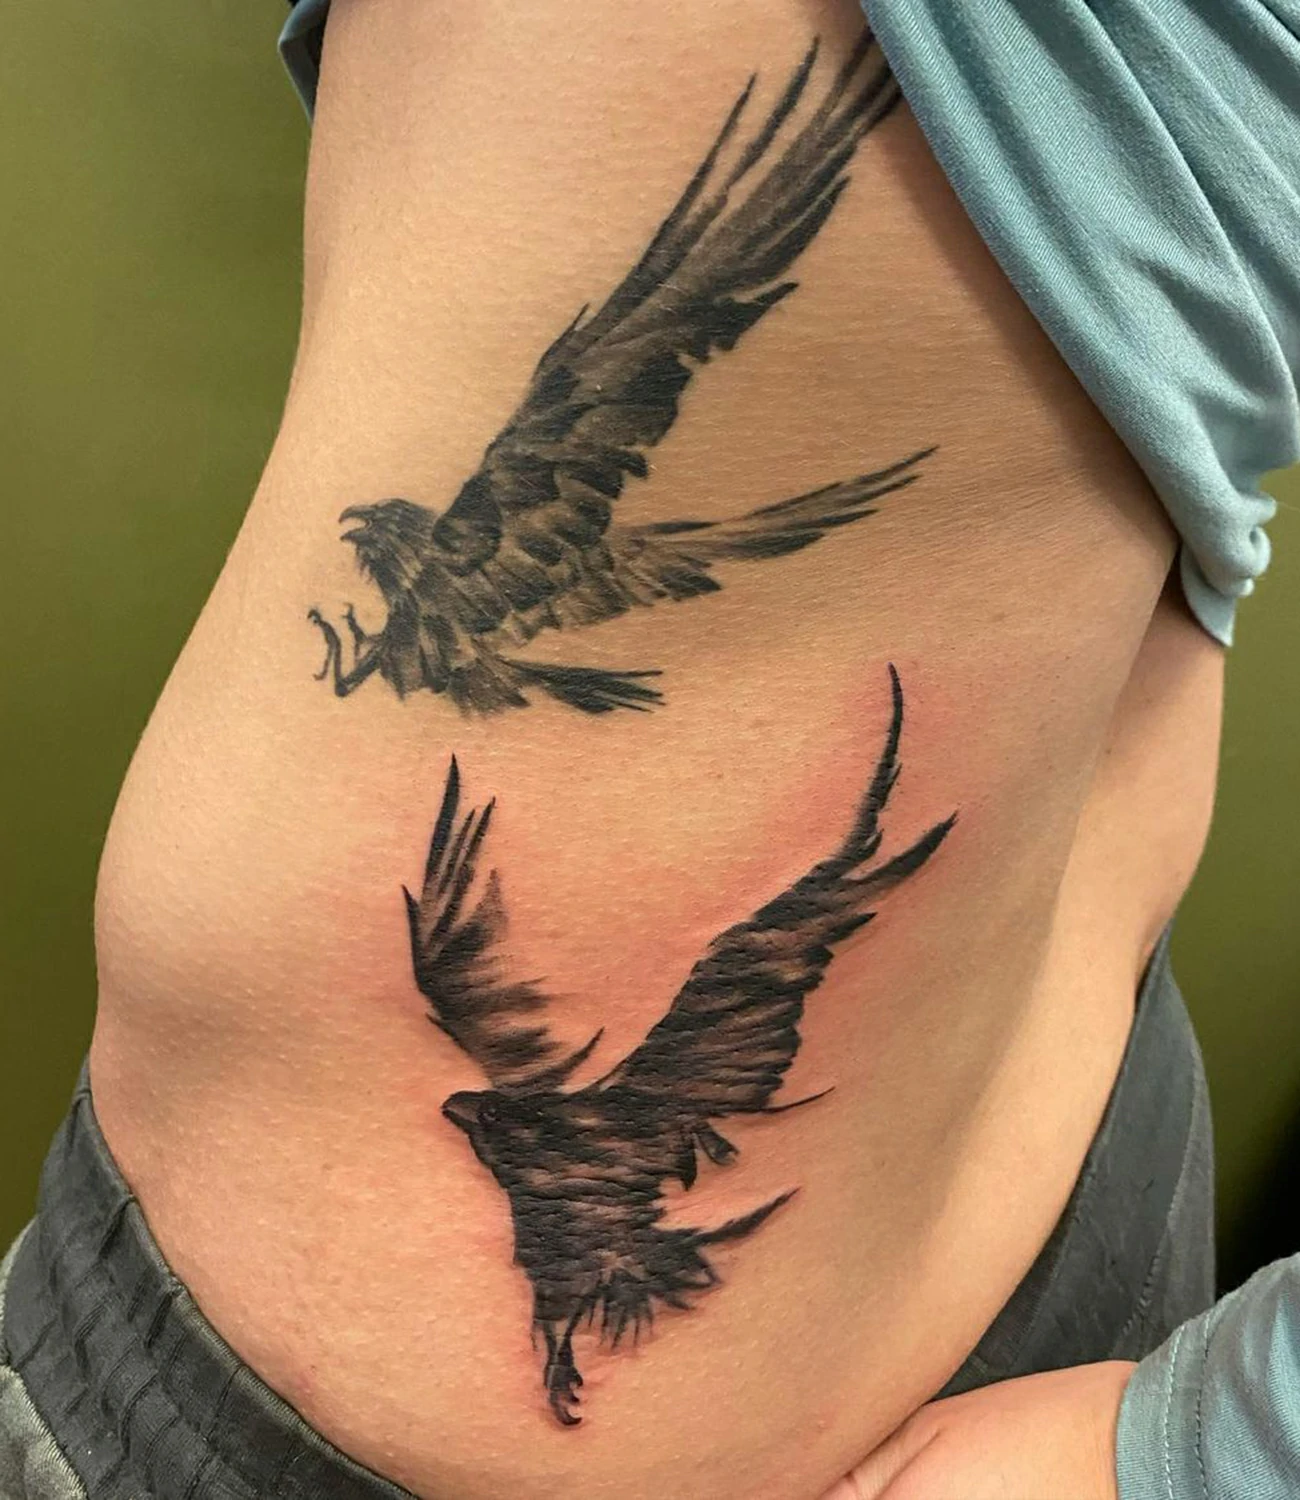 Flying raven tattoo: A dynamic tattoo showing a raven in flight.